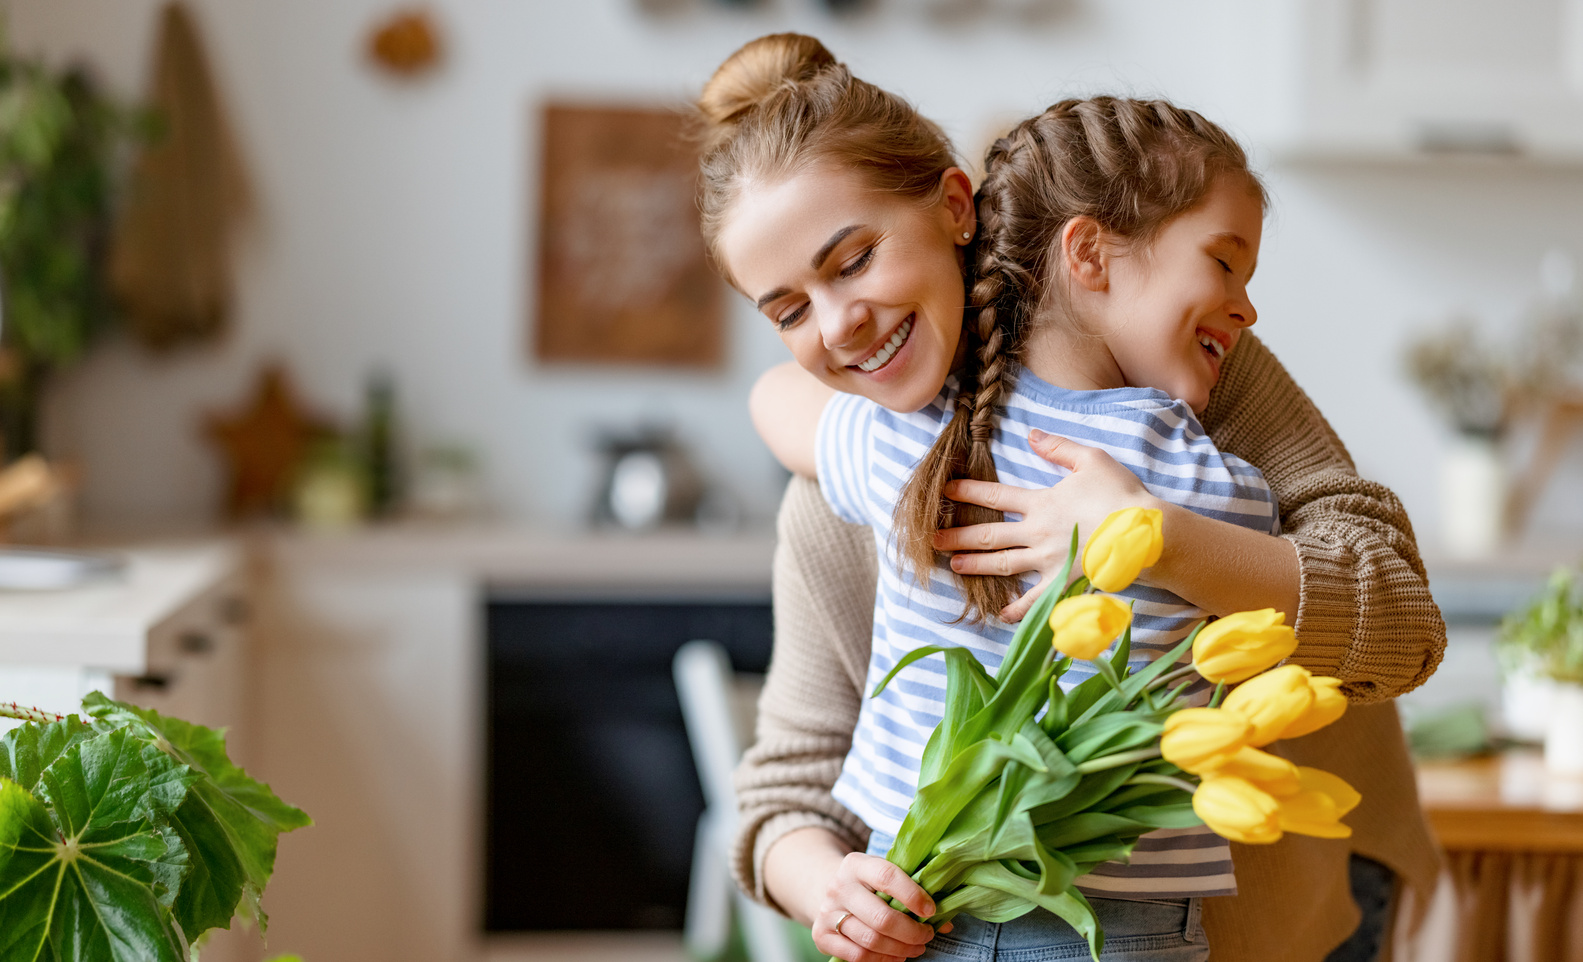 Happy mother receiving flowers from daughter